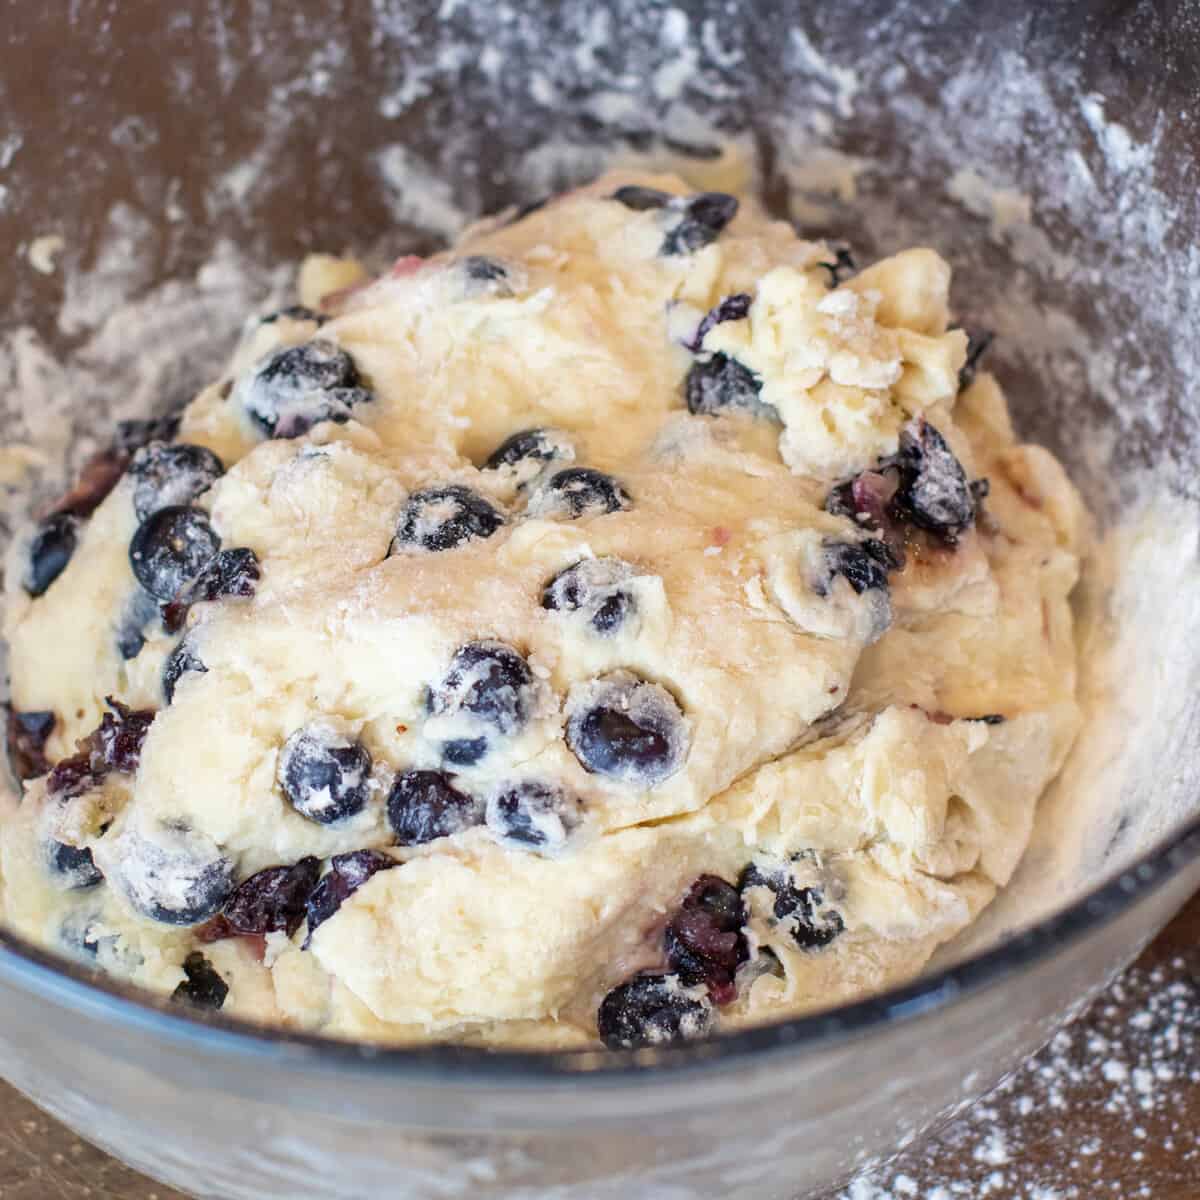 Blueberry scone dough mixed and ready.